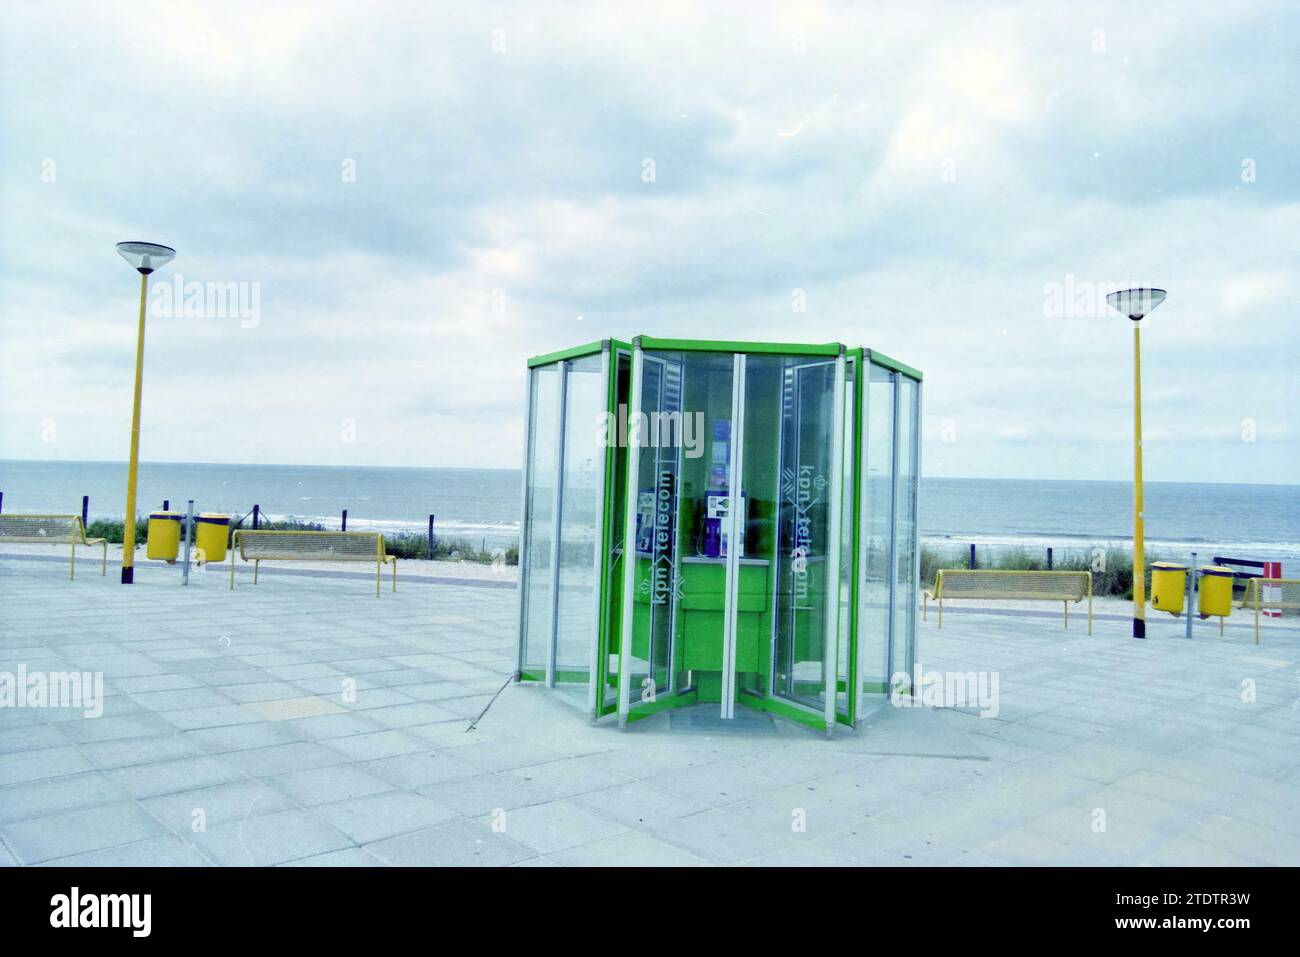 Telephone booths, Bloemendaal aan Zee, Bloemendaal, 06-07-2000, Whizgle News from the Past, Tailored for the Future. Explore historical narratives, Dutch The Netherlands agency image with a modern perspective, bridging the gap between yesterday's events and tomorrow's insights. A timeless journey shaping the stories that shape our future Stock Photo